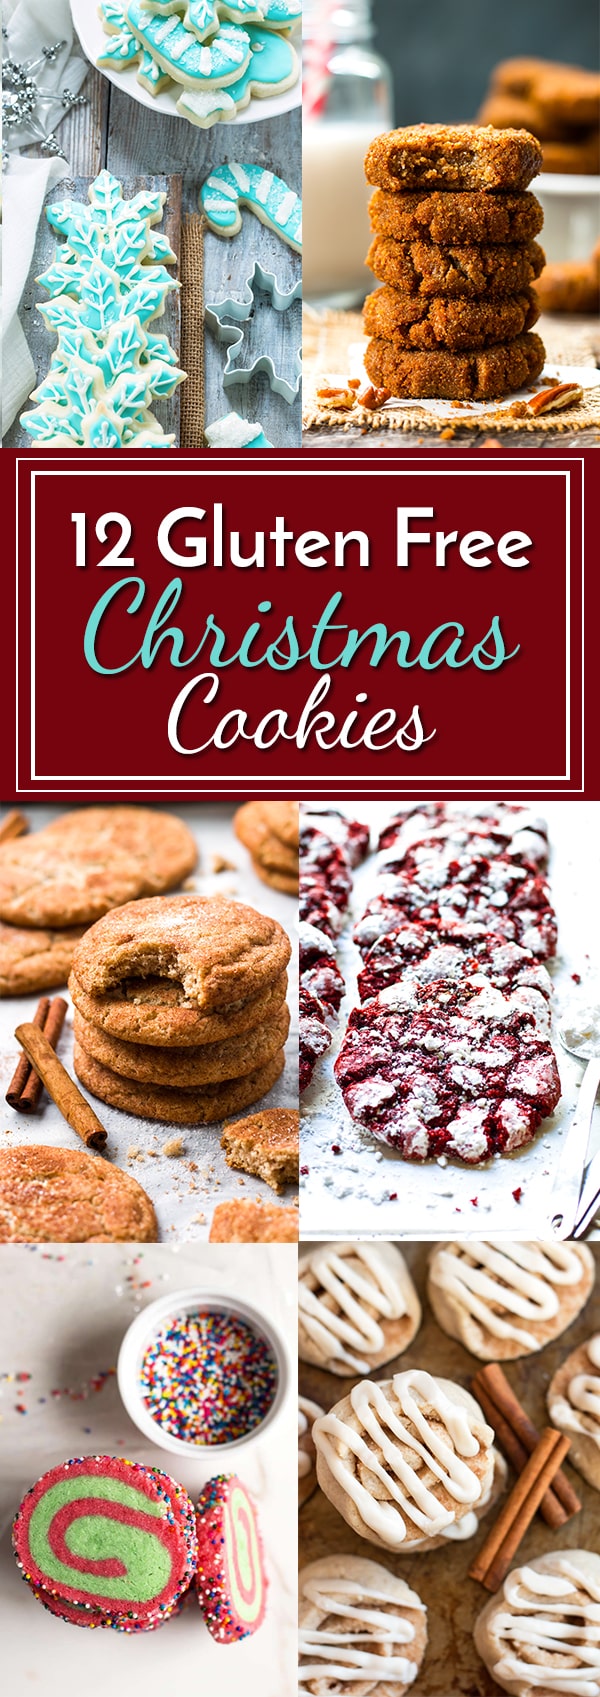 12 Gluten Free Christmas Cookies - Evolving Table